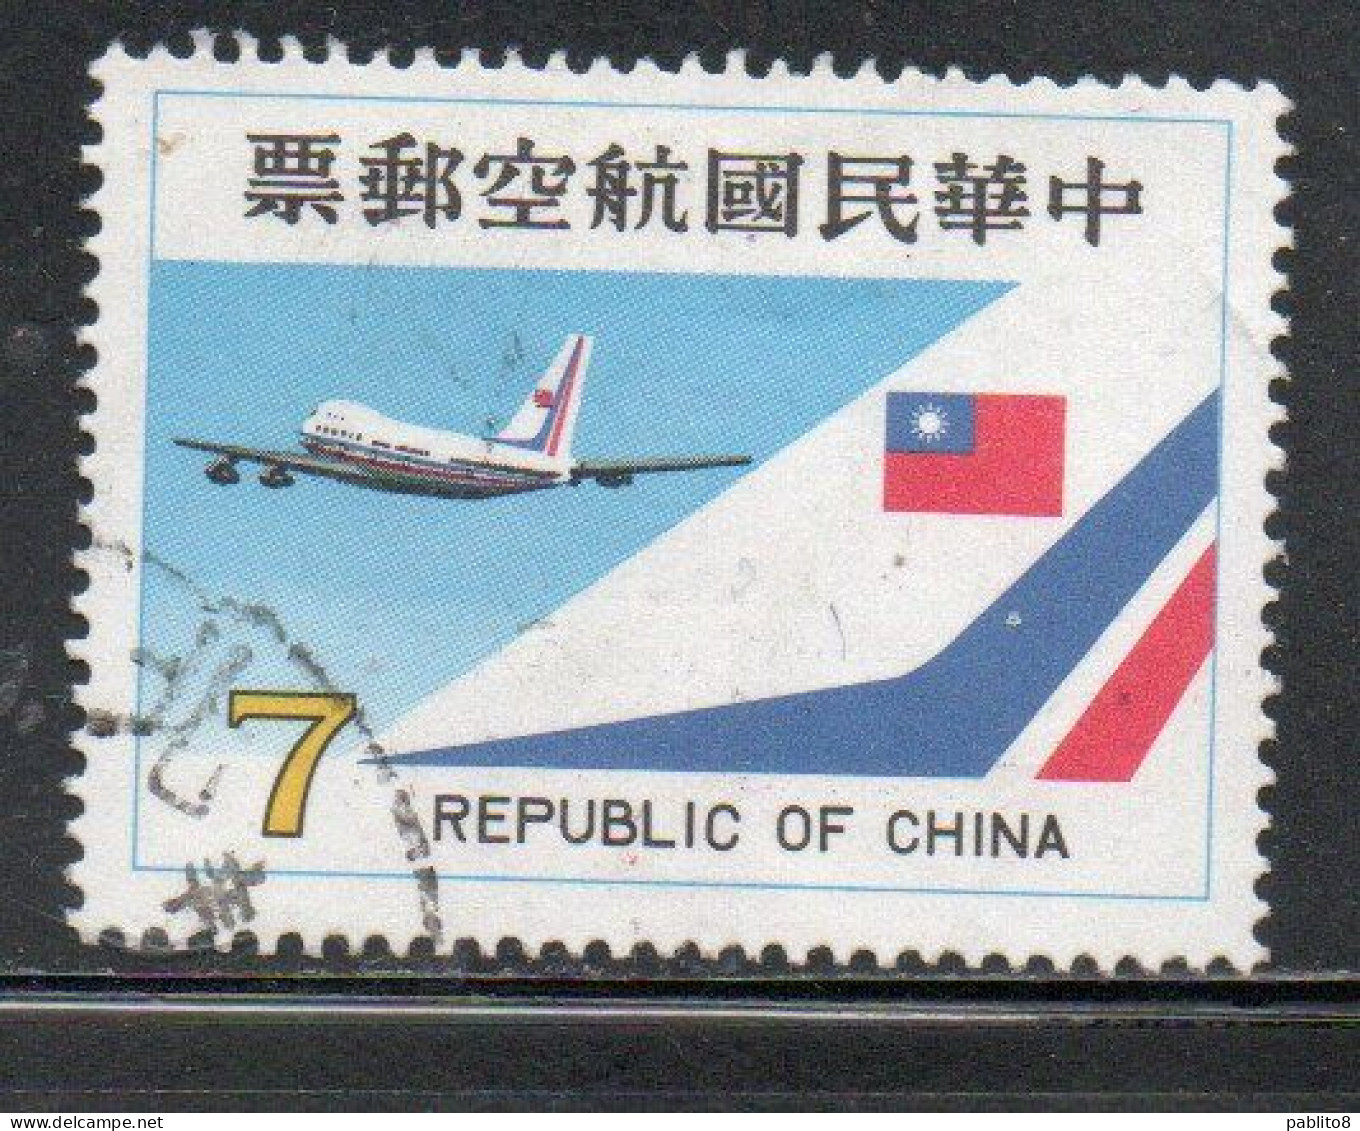 CHINA REPUBLIC CINA TAIWAN FORMOSA 1980 AIR POST MAIL AIRMAIL CHINA AIRLINES JET 7$ USED USATO OBLITERE' - Poste Aérienne